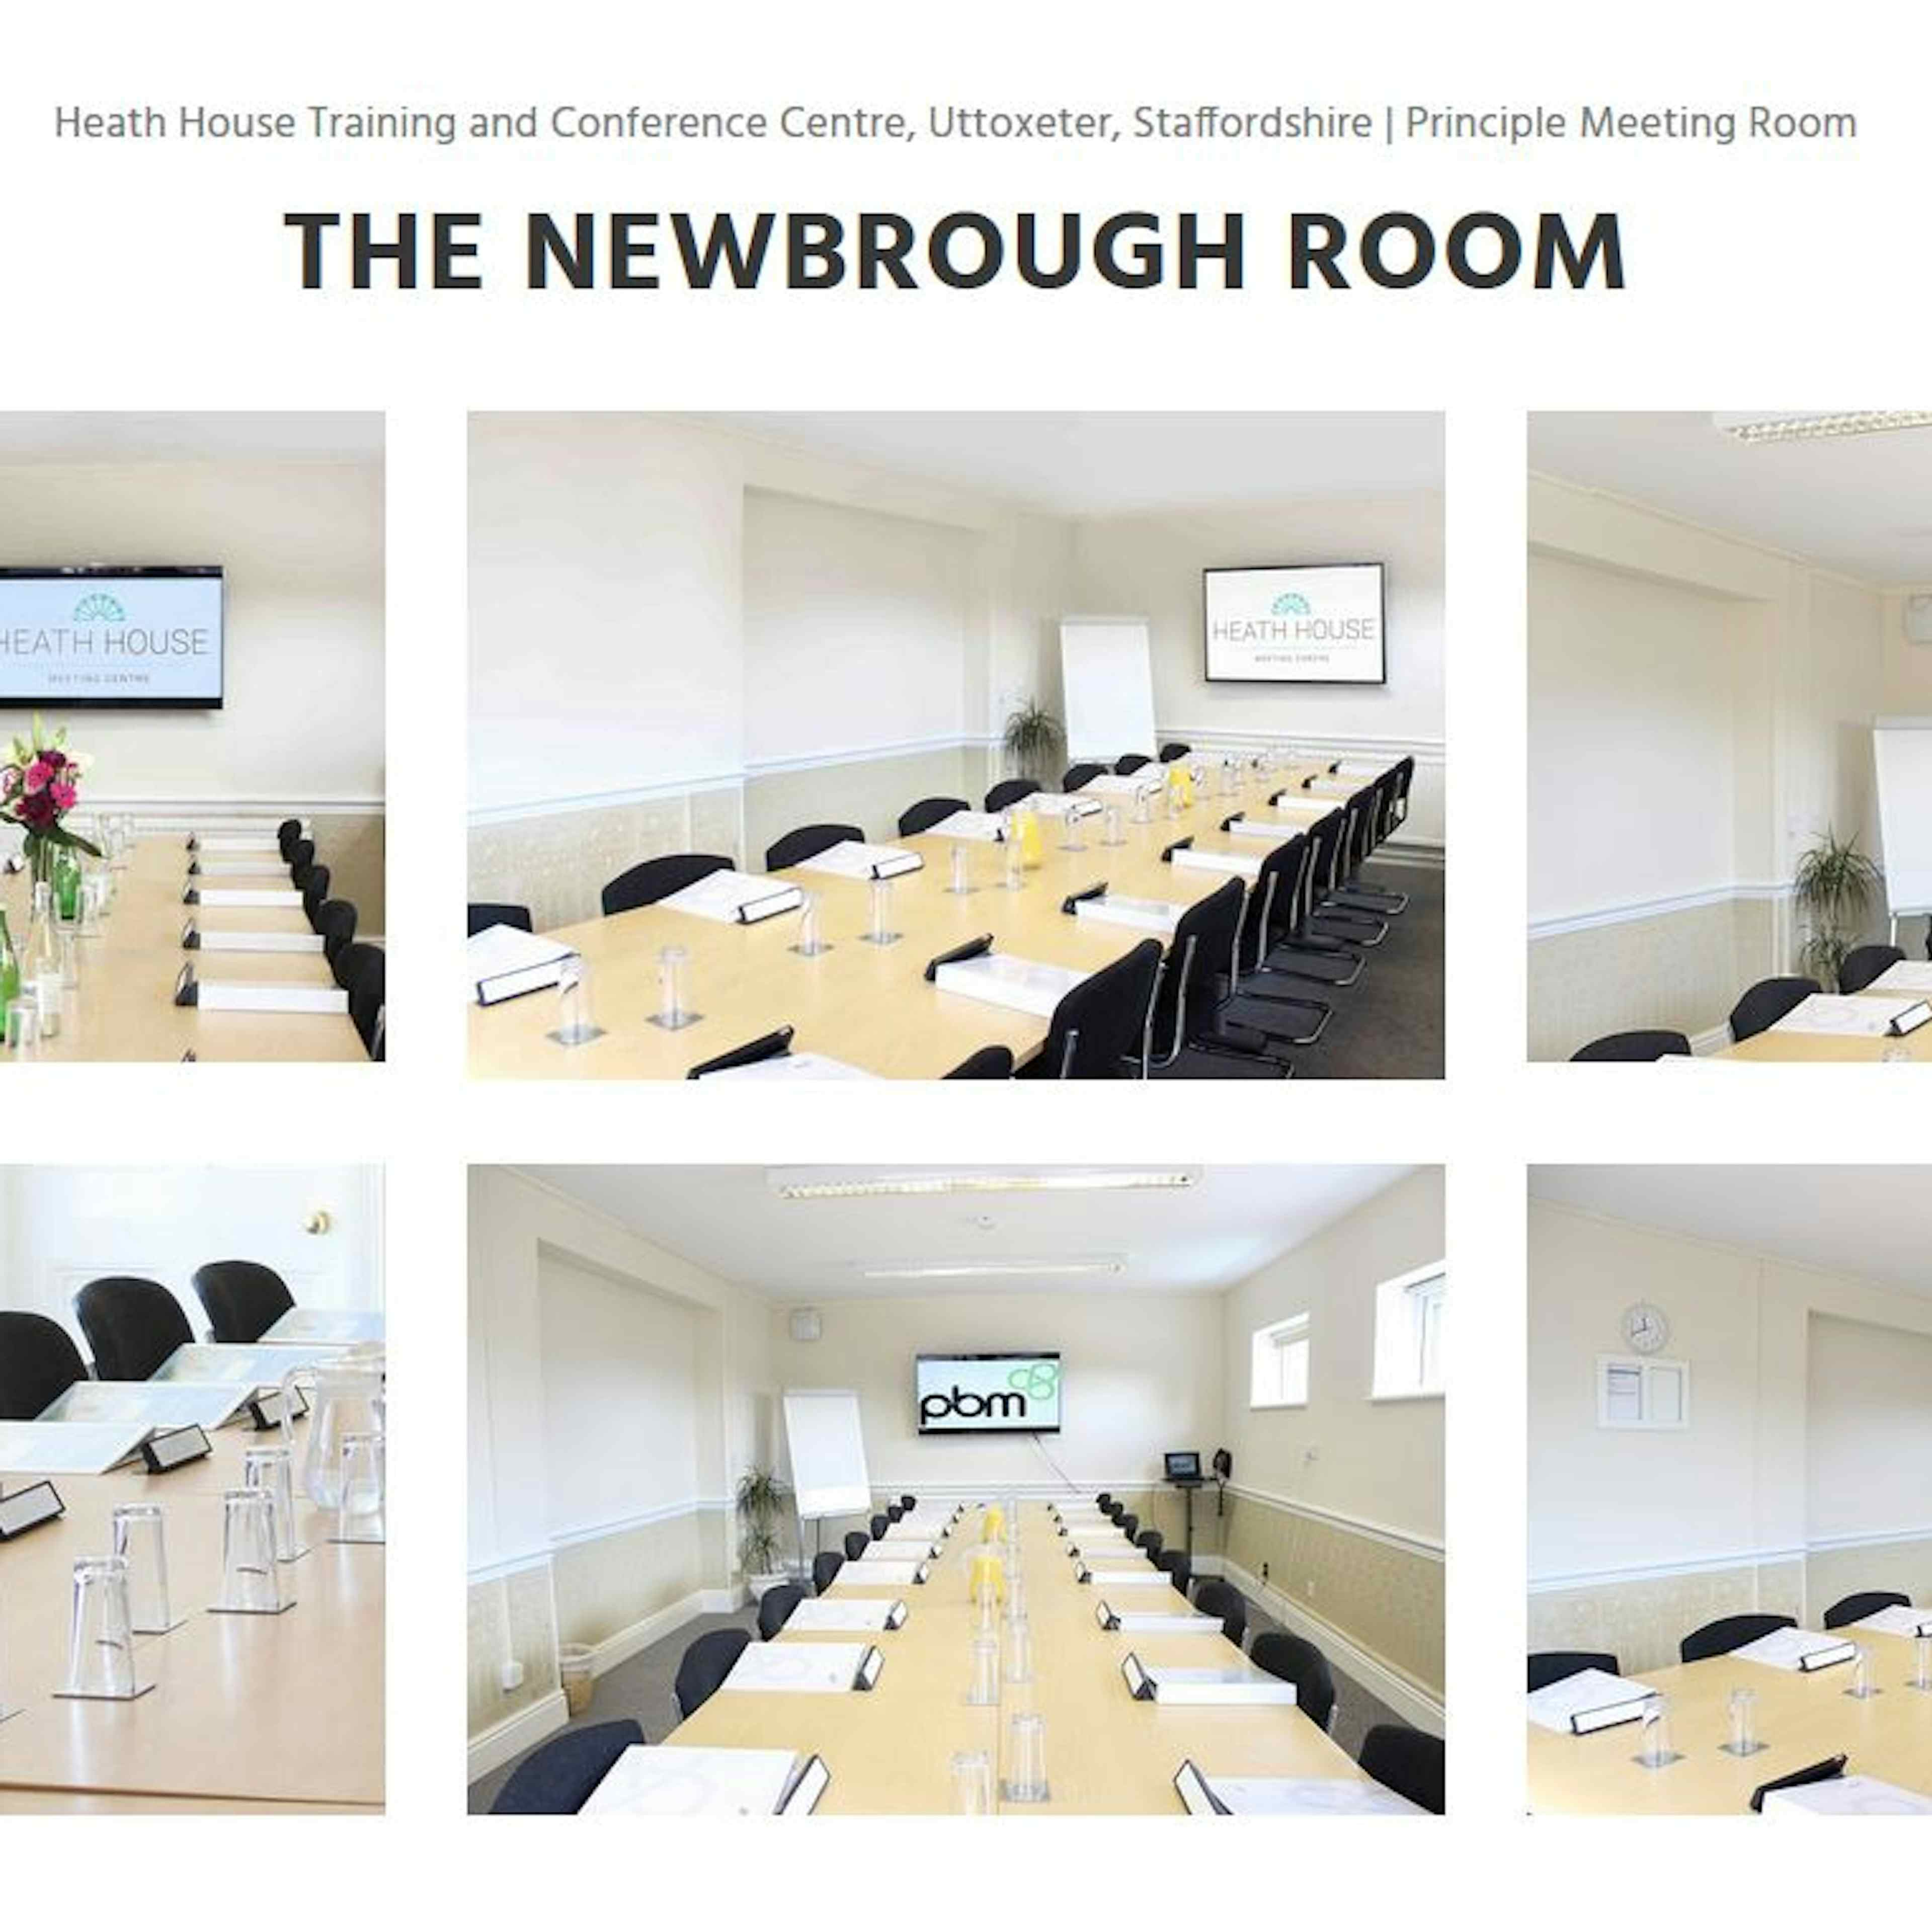 Heath House Conference Centre  - Newbrough Meeting Room image 2